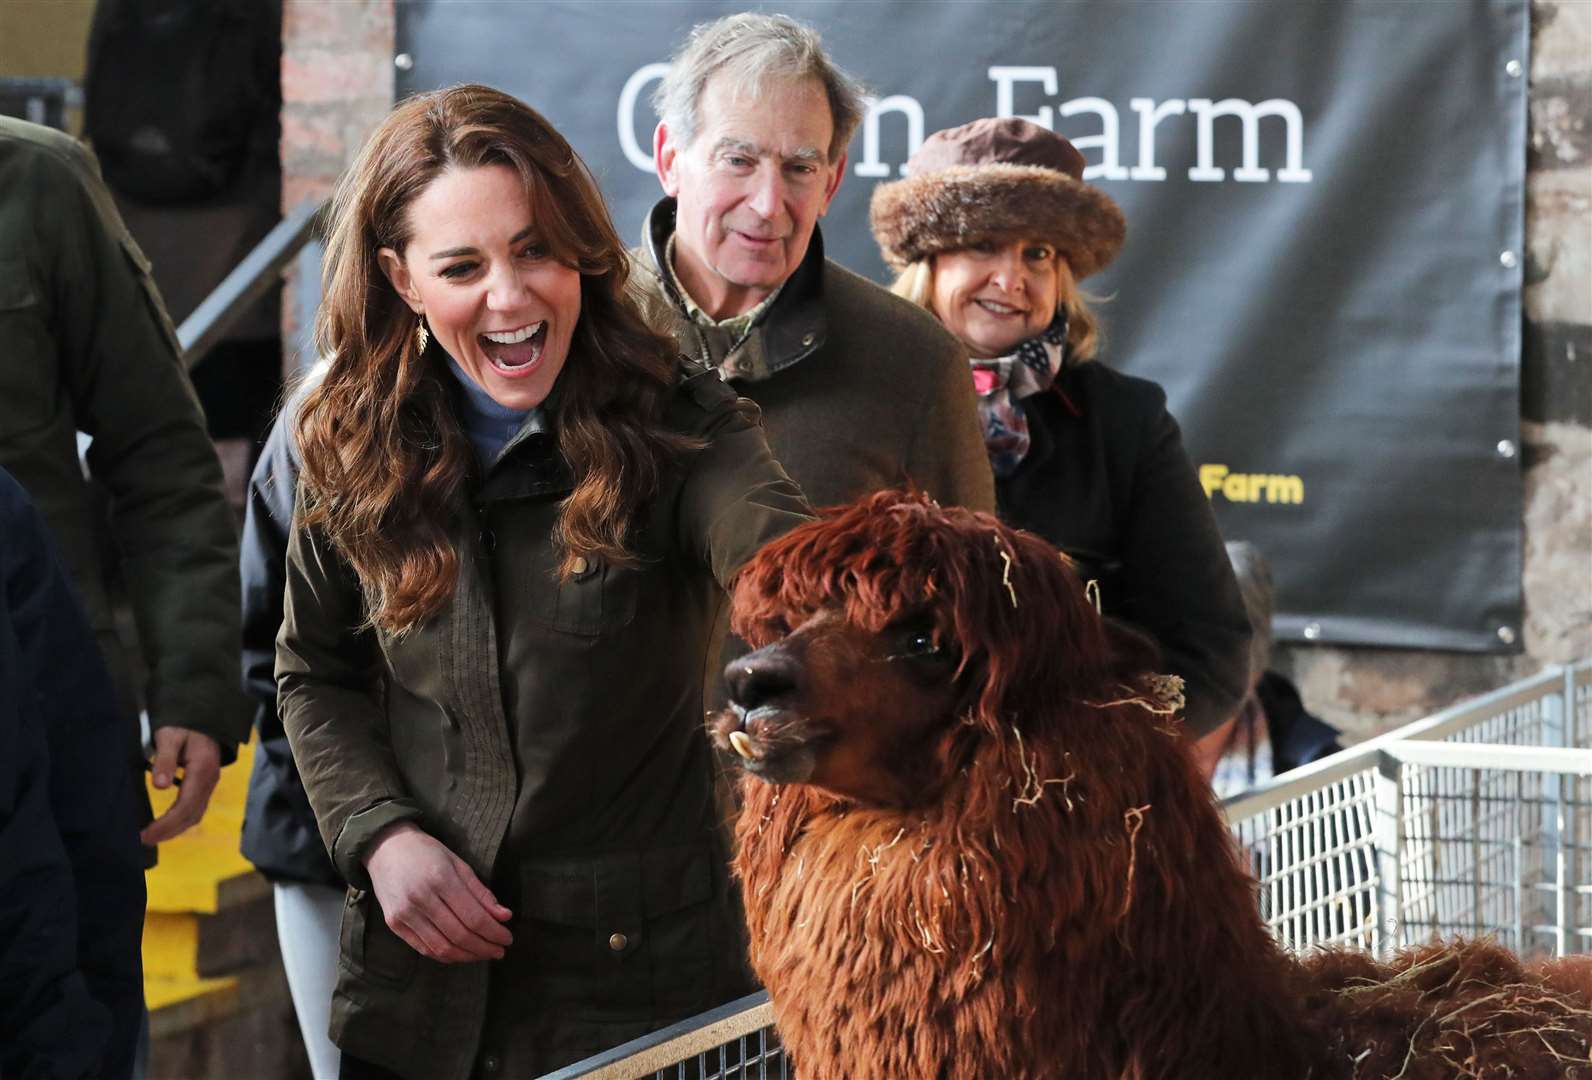 The Duchess of Cambridge strokes an alpaca during a February visit to The Ark Open Farm, at Newtownards, near Belfast (Liam McBurney/PA)